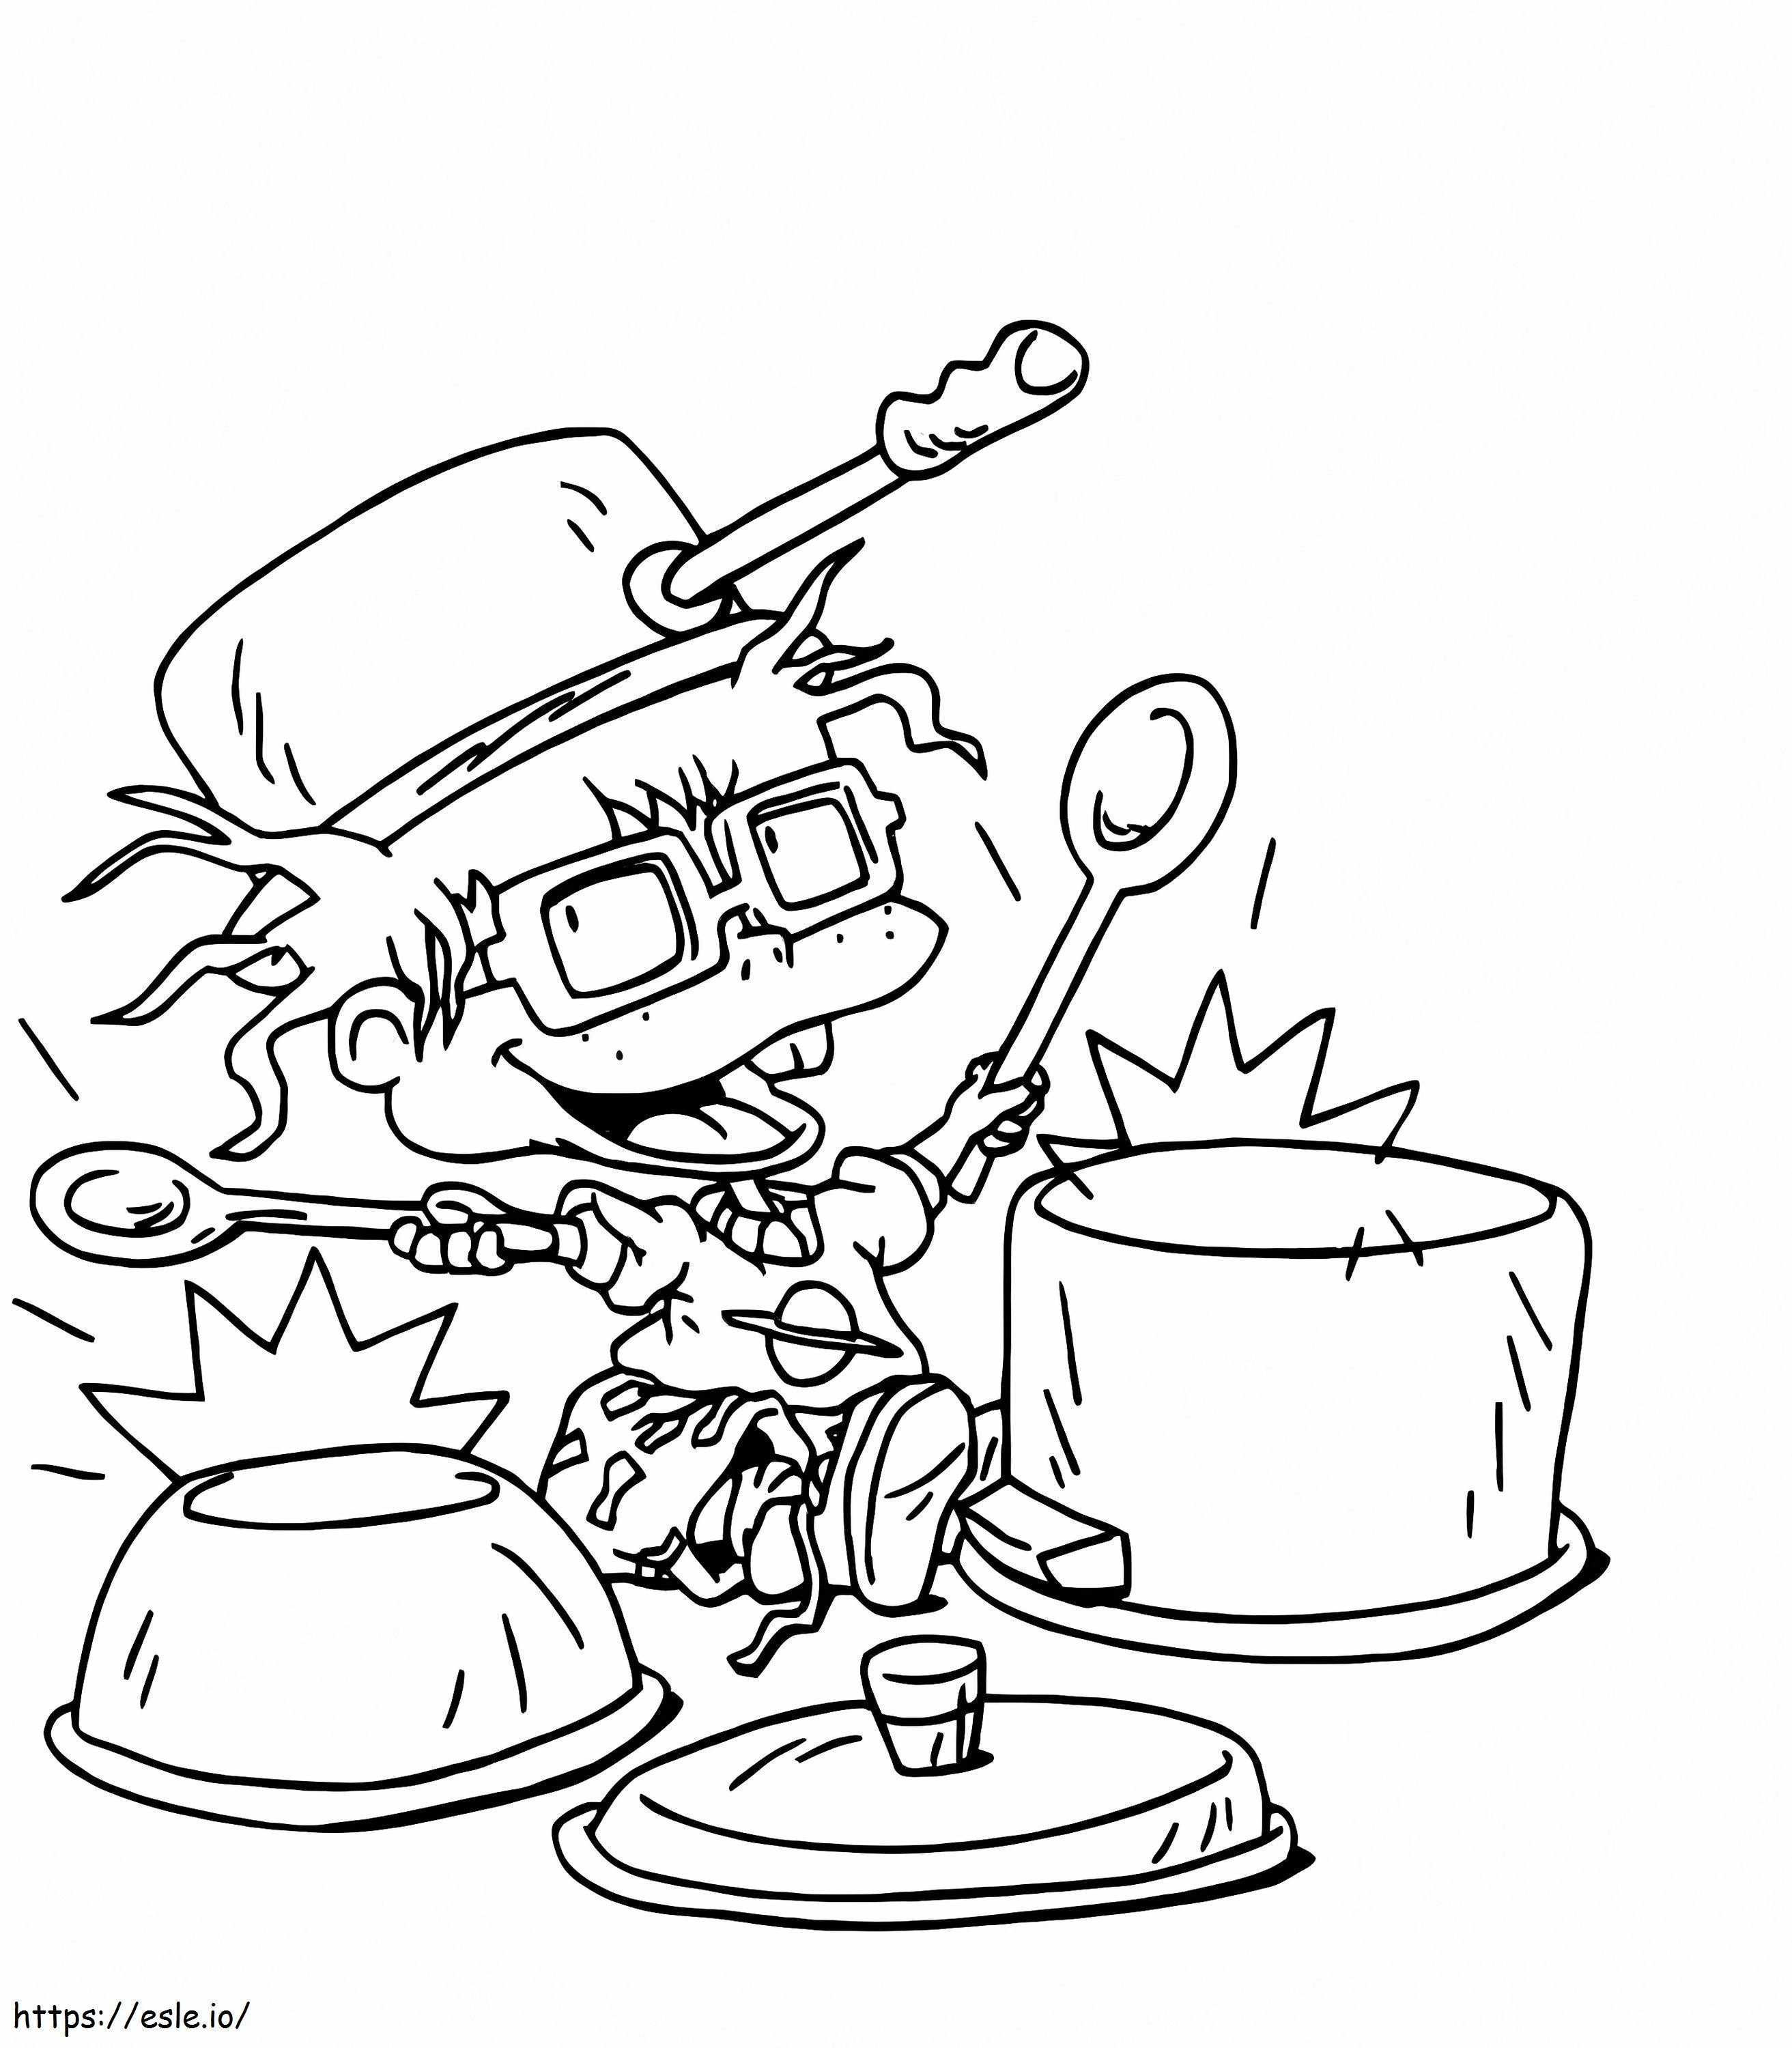 Chuckie Playing On Drums coloring page